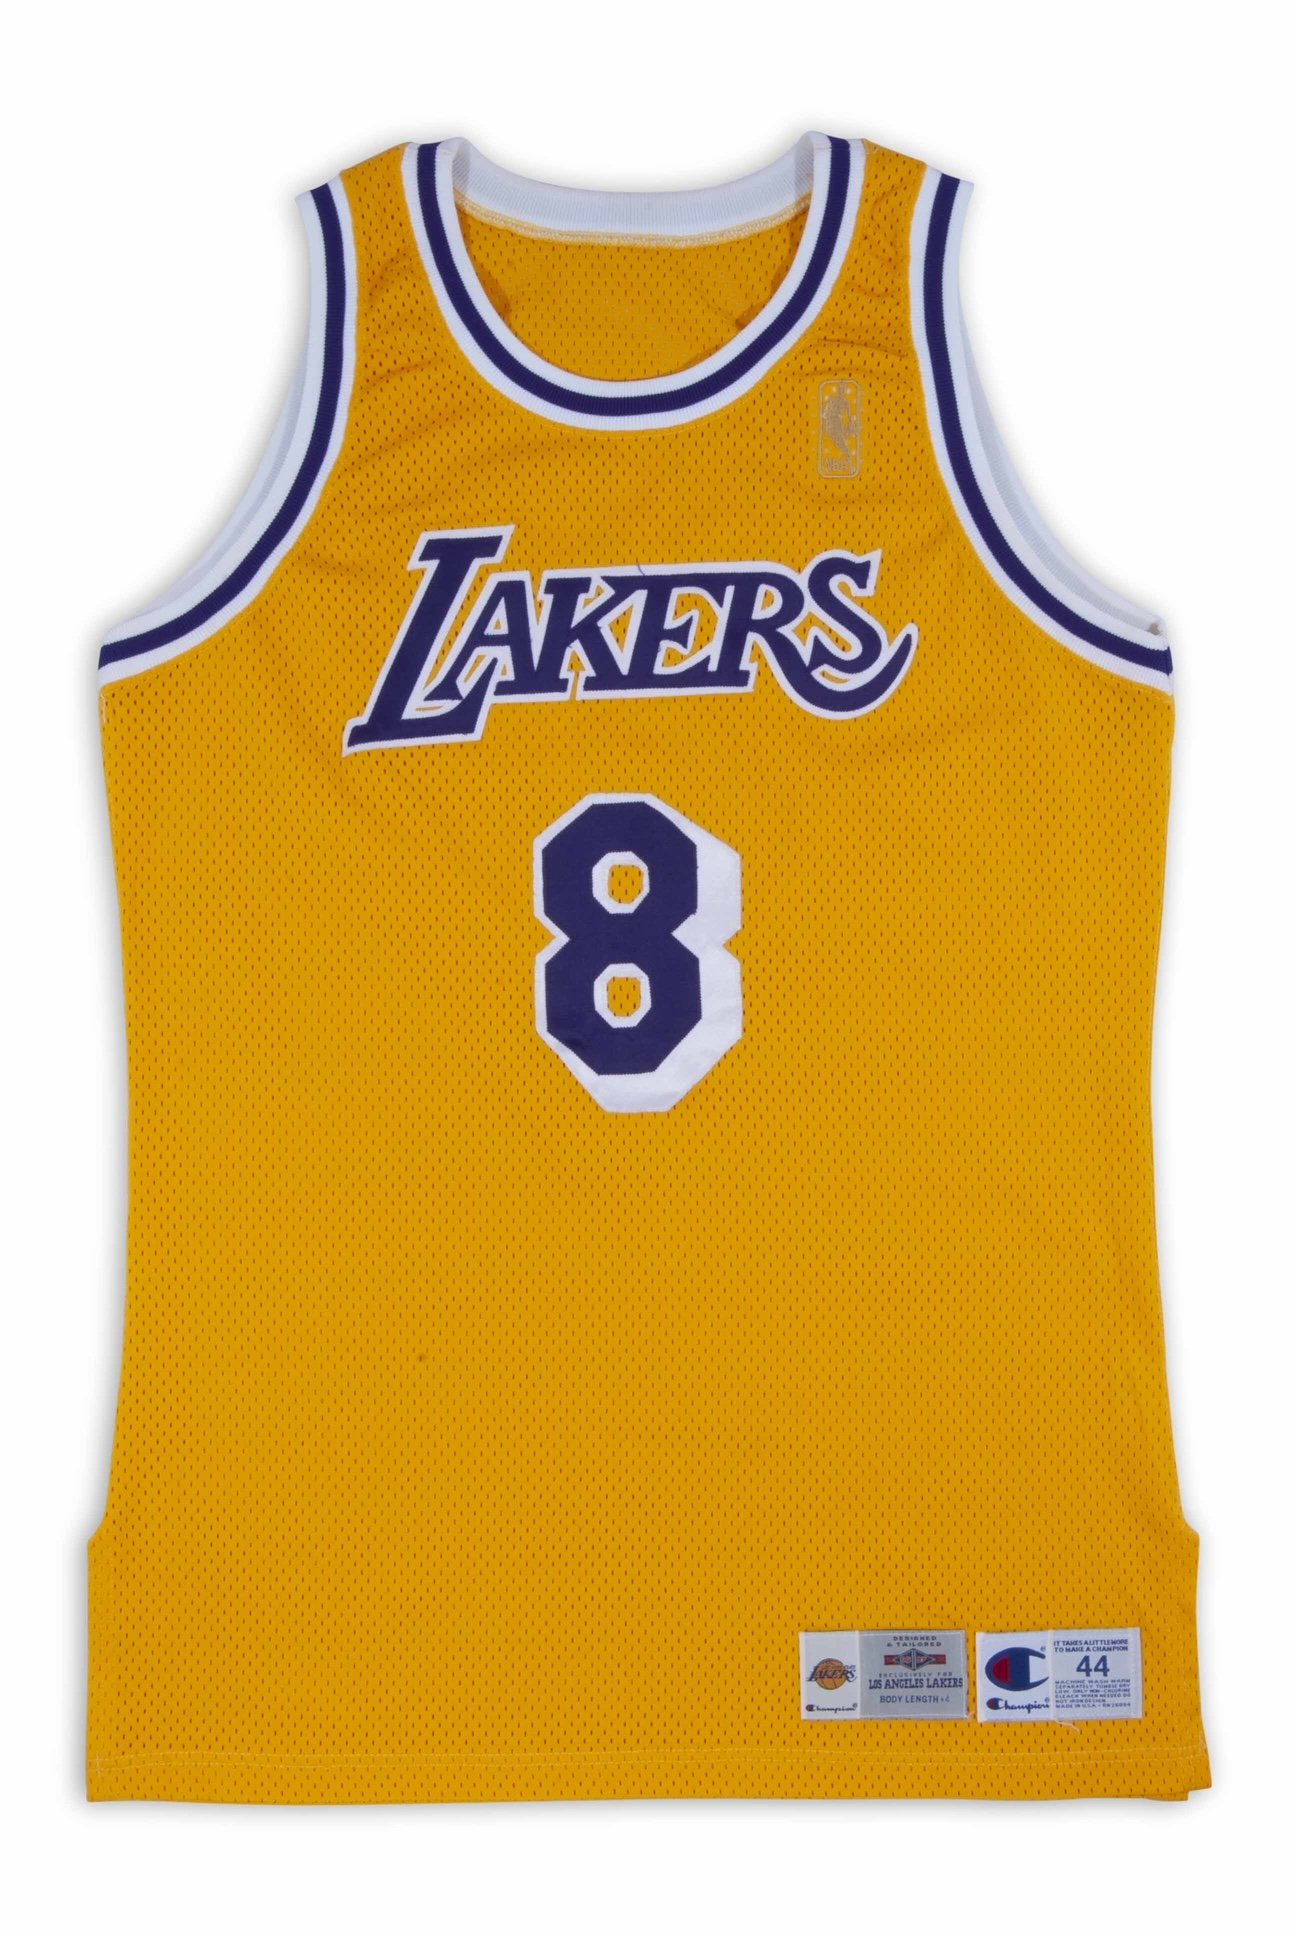 Kobe Bryant rookie jersey to be auctioned, $3M-5M estimate - The San Diego  Union-Tribune